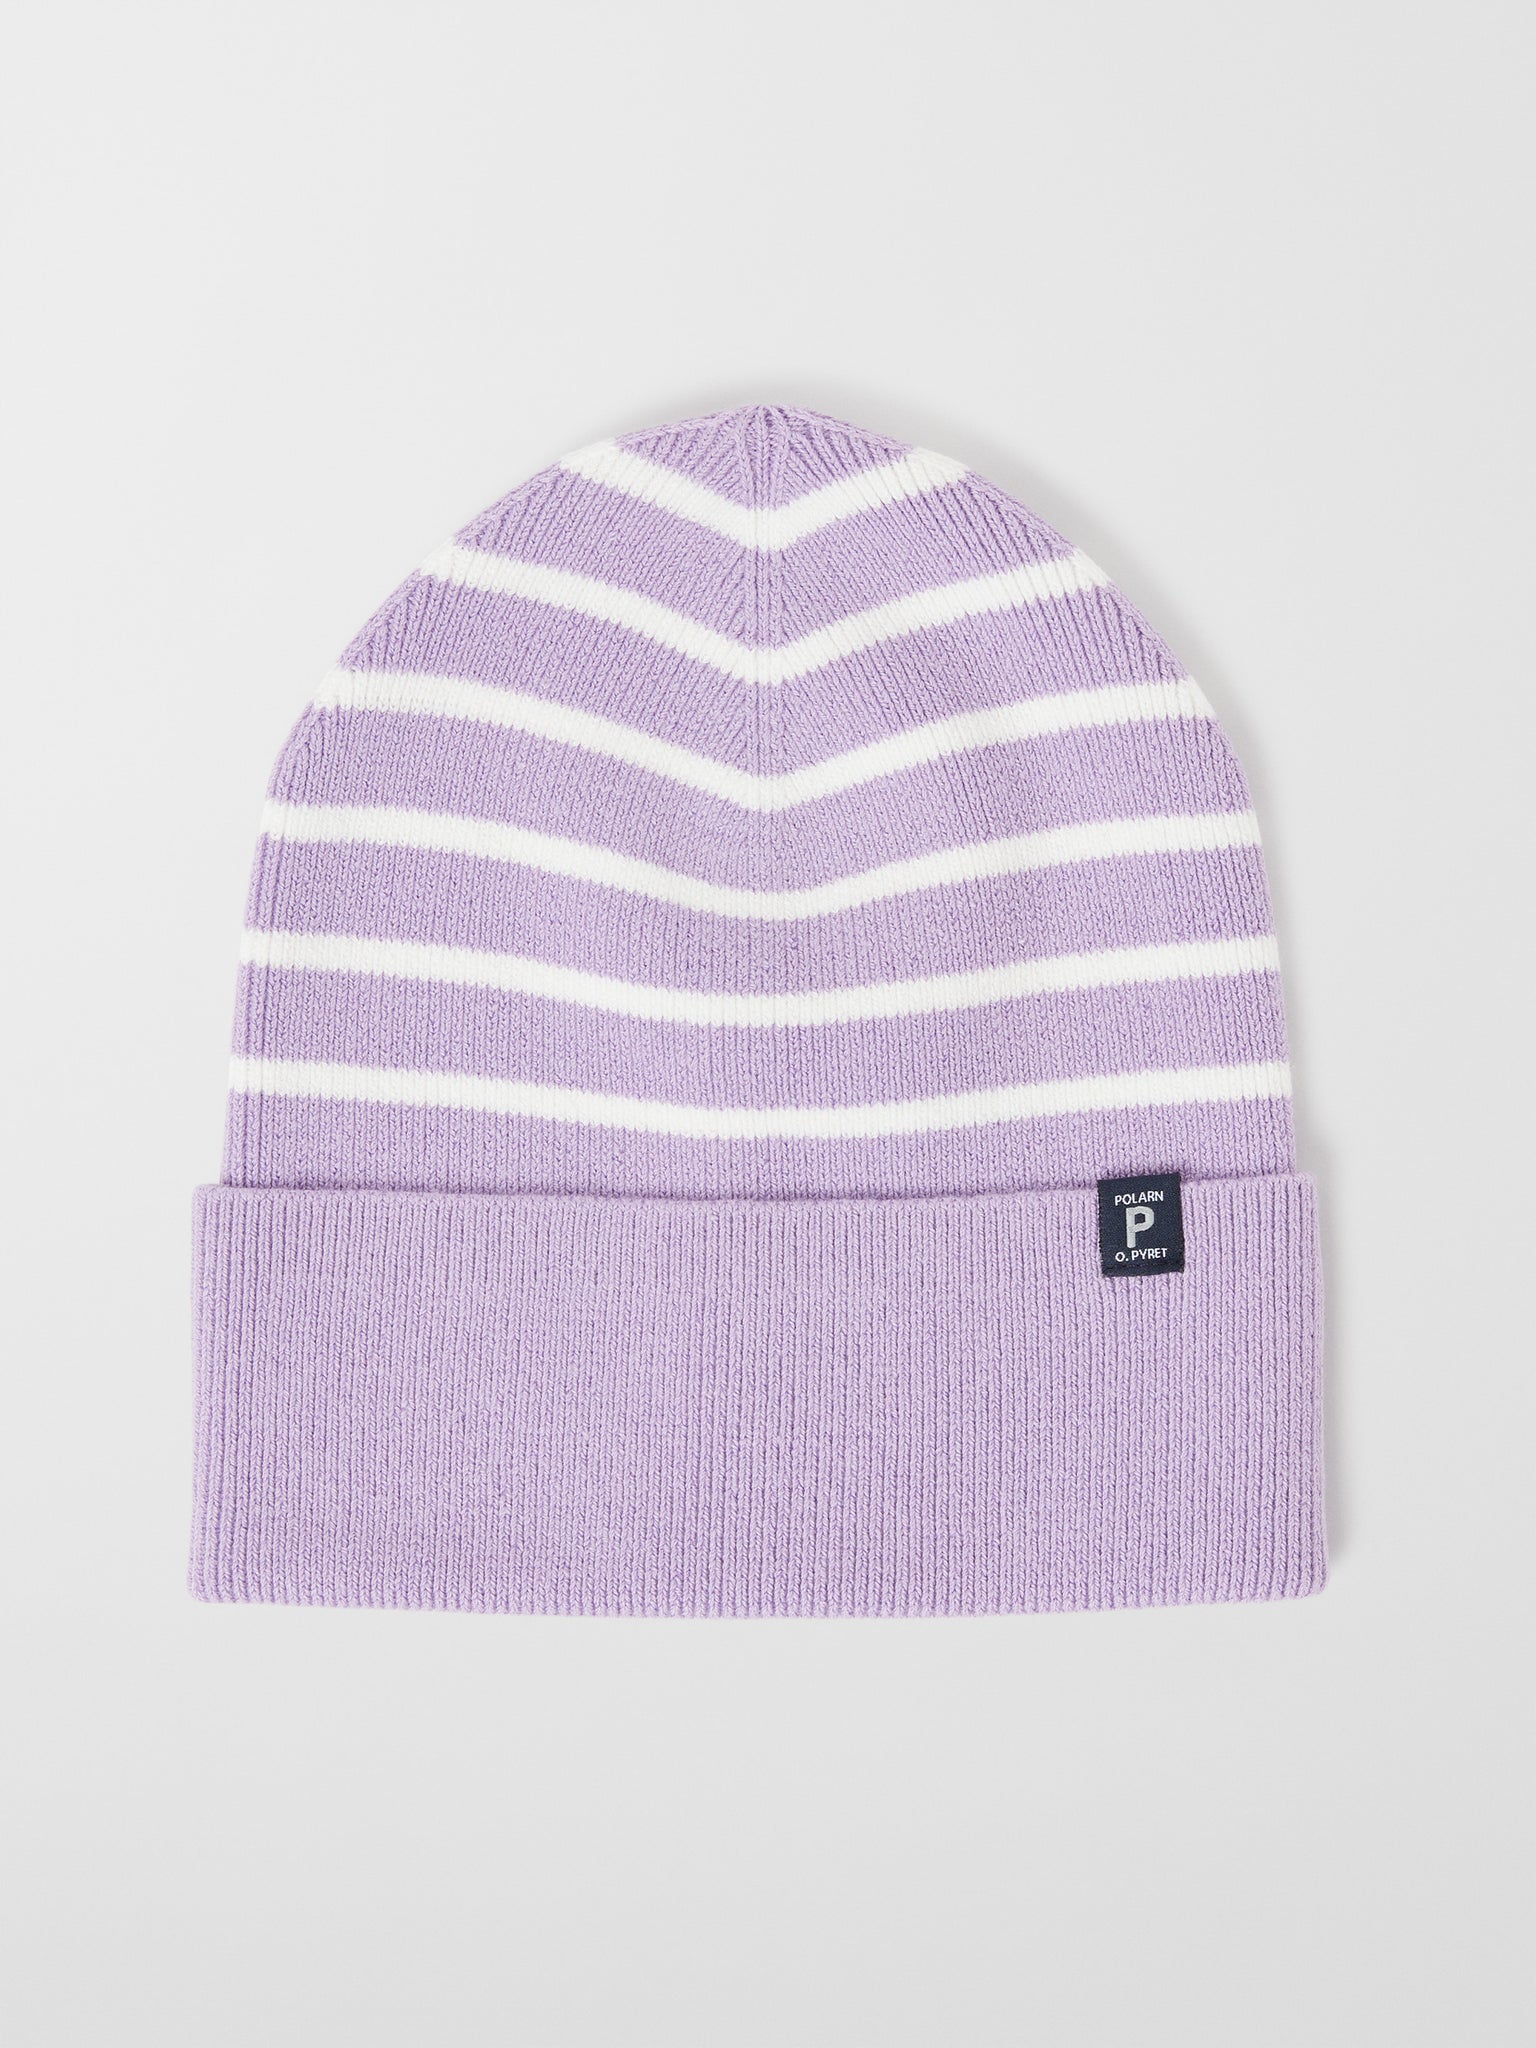 Striped Knitted Kids Beanie Hat 2-9y / 52/54